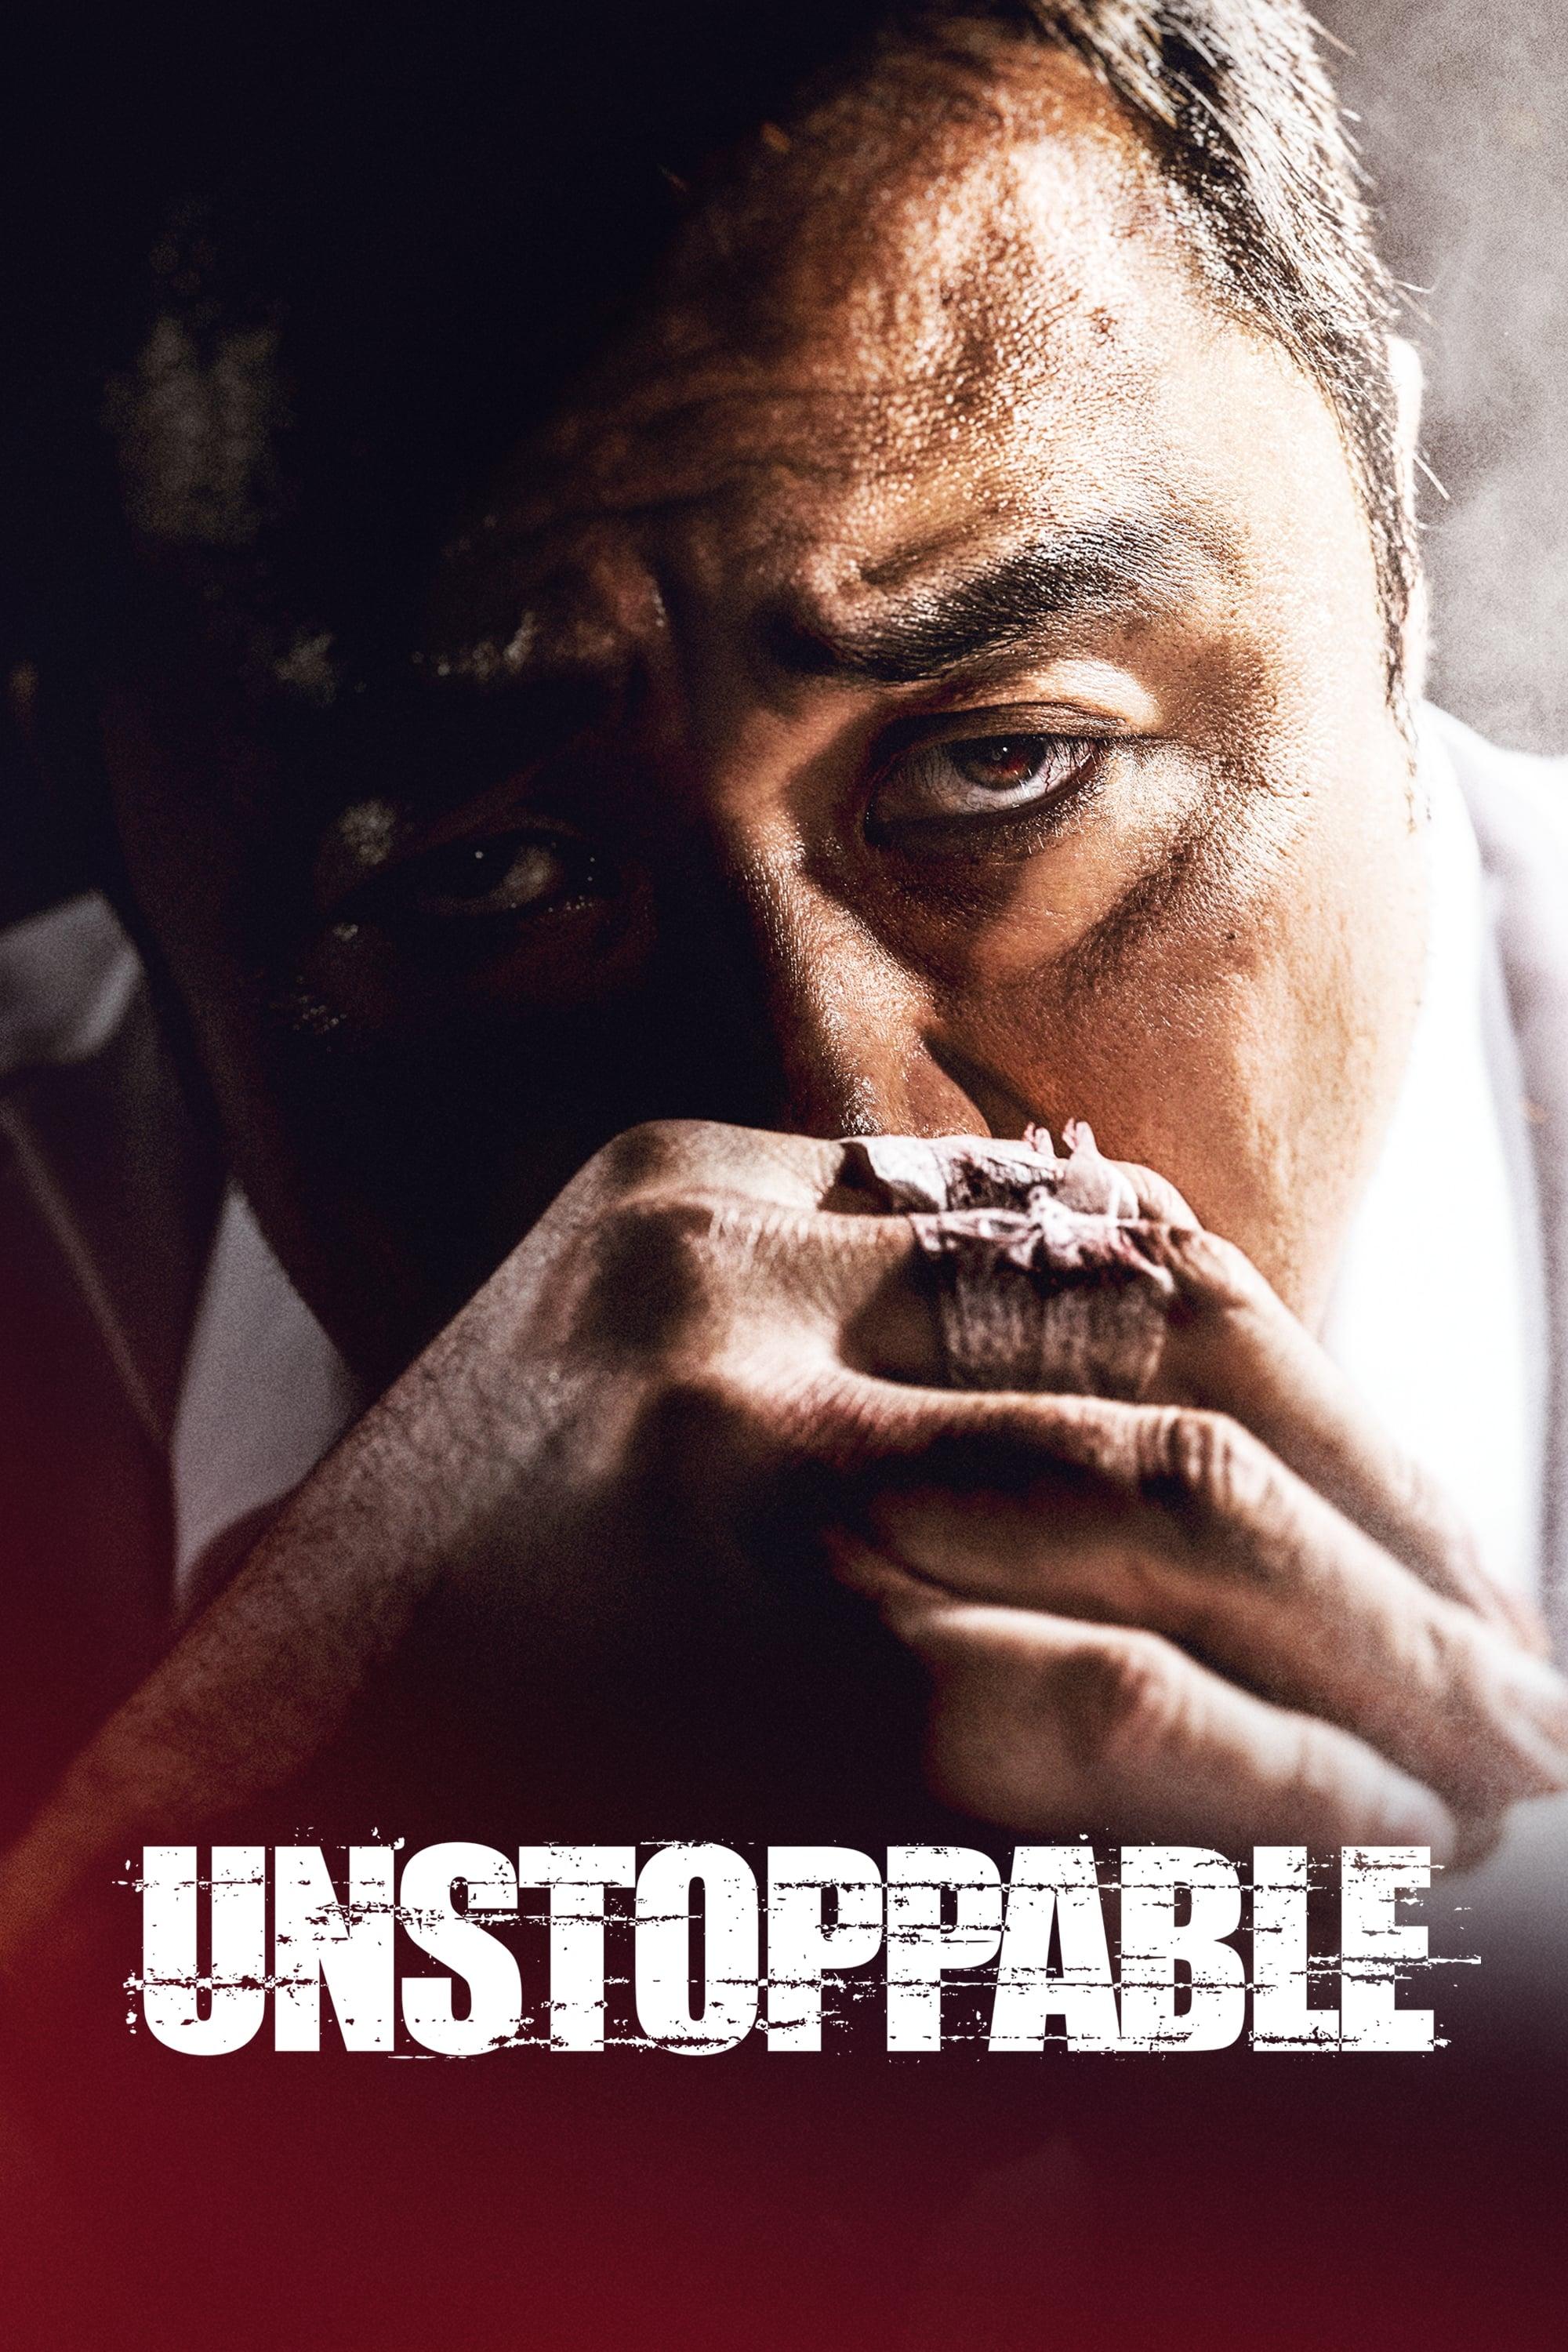 Unstoppable poster